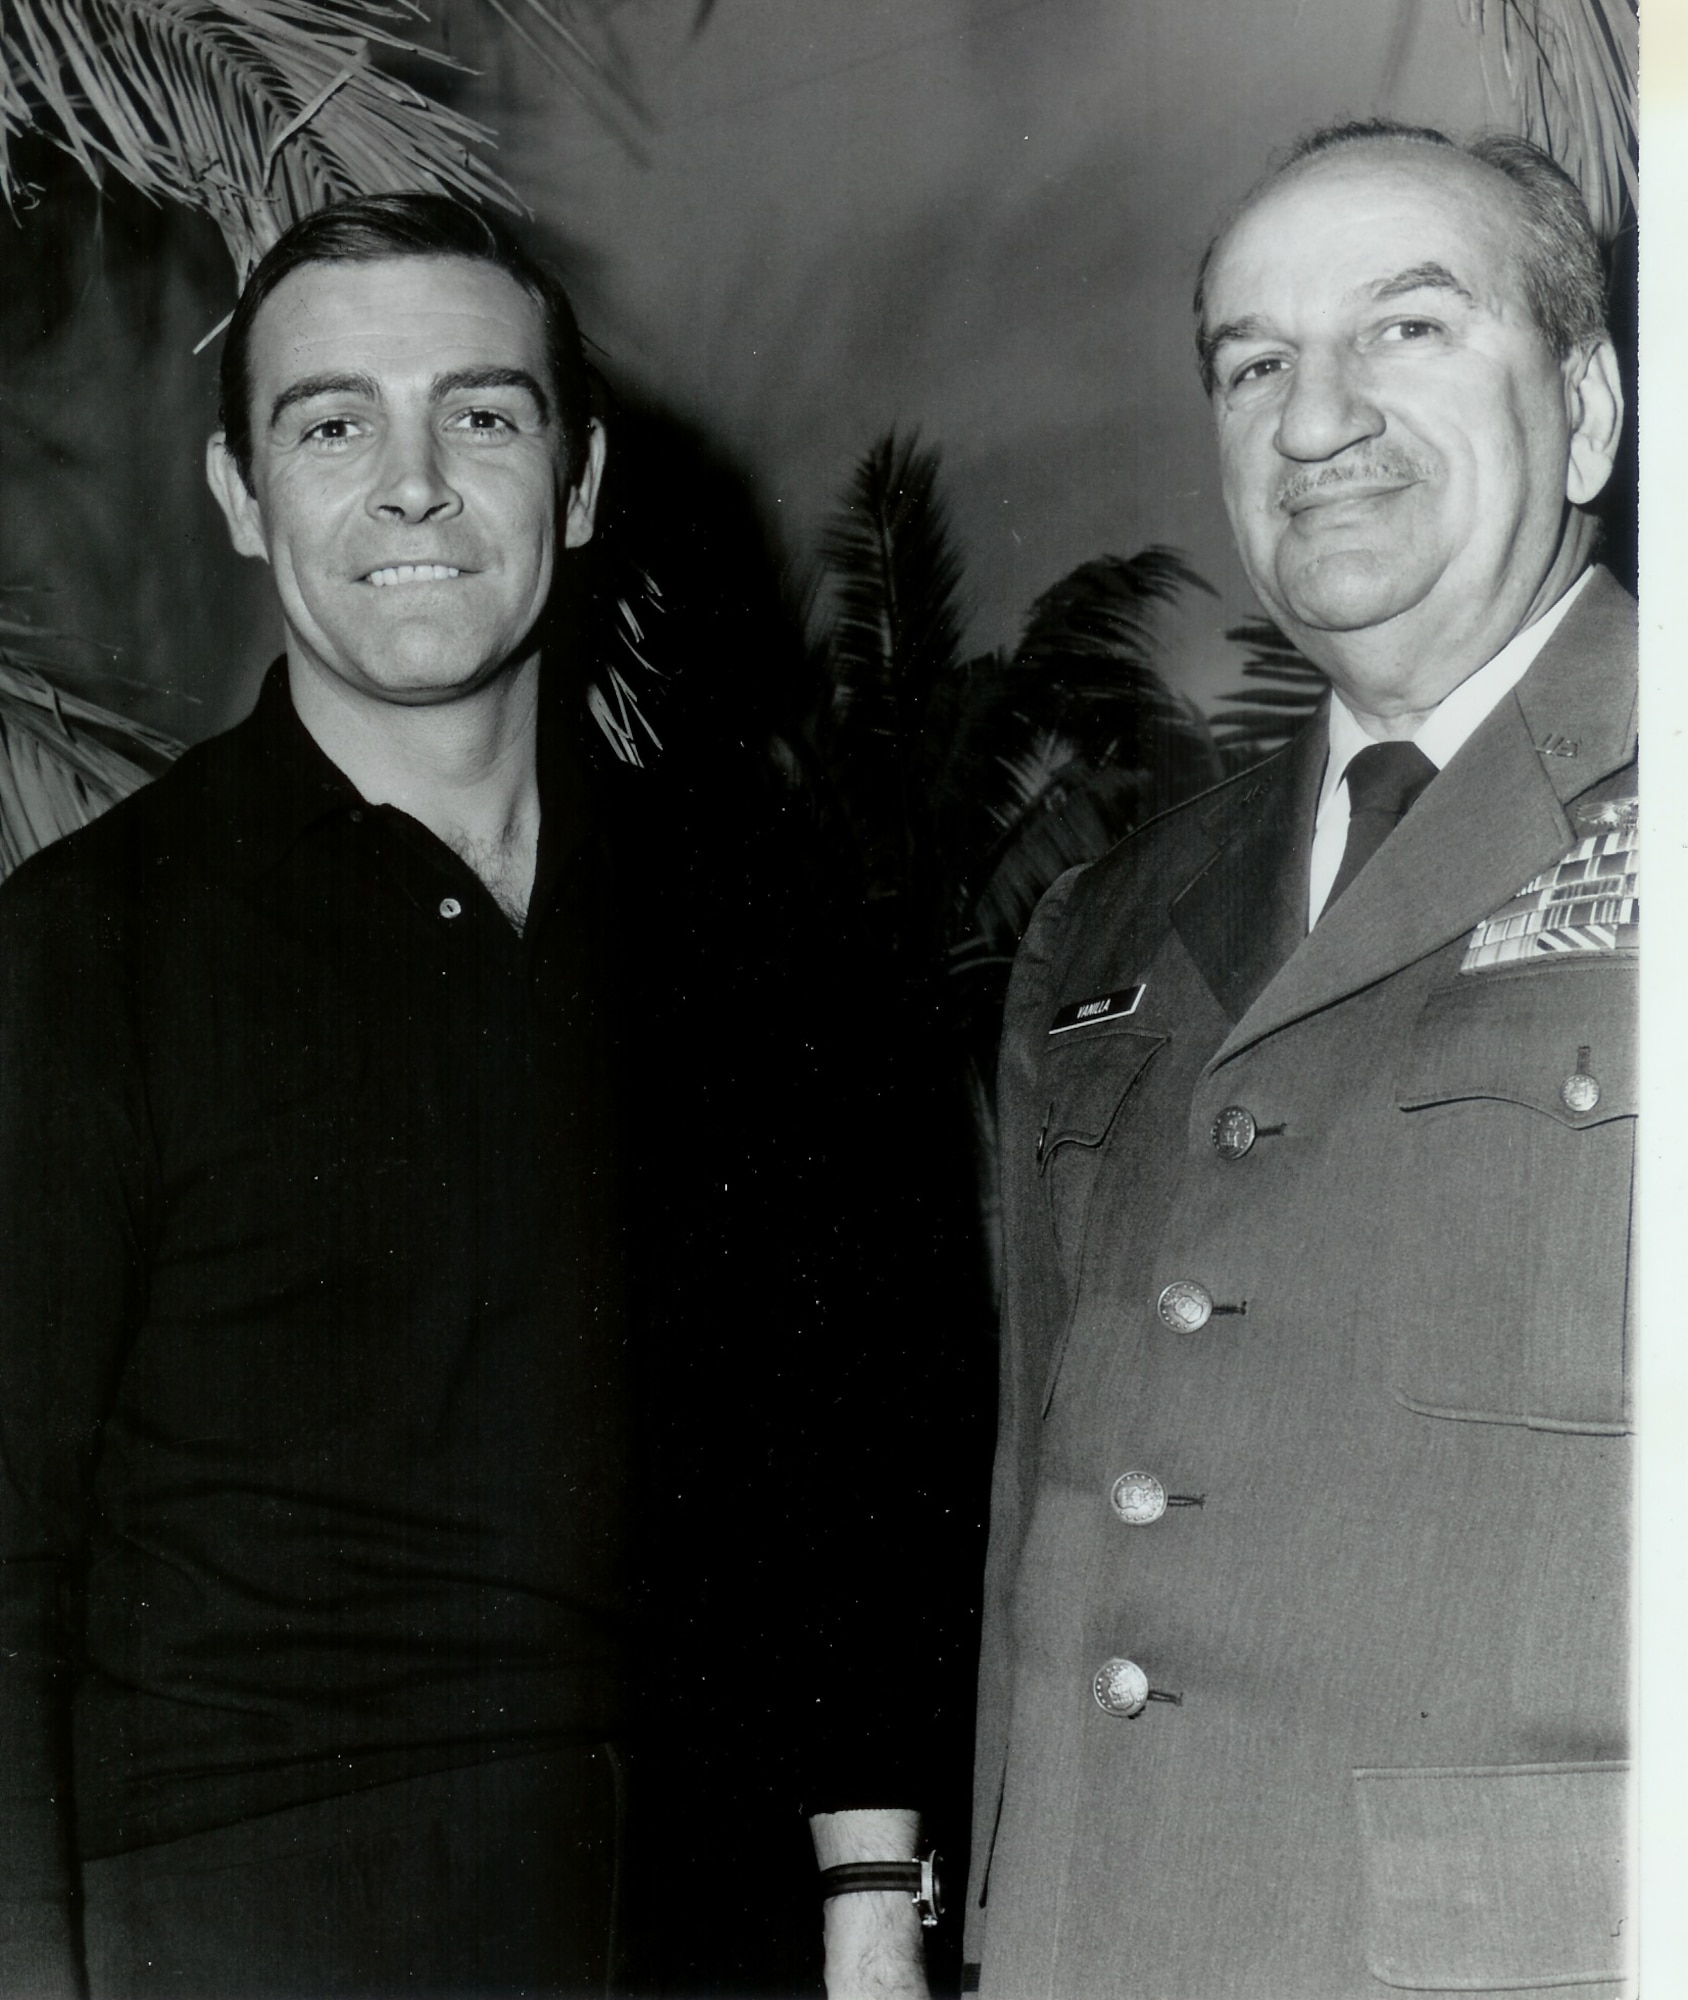 Retired Lieutenant Colonel Charles Russhon, military advisor to the James Bond films in the ‘60s and ‘70s, poses with Sean Connery during the production of “Thunderball.” Russhon took Connery in tow when he arrived in New York, and they remained friends until Russhon passed away in 1982, Russhon’s wife, Claire Russhon, said. (Photo courtesy of Christian Russhon) 